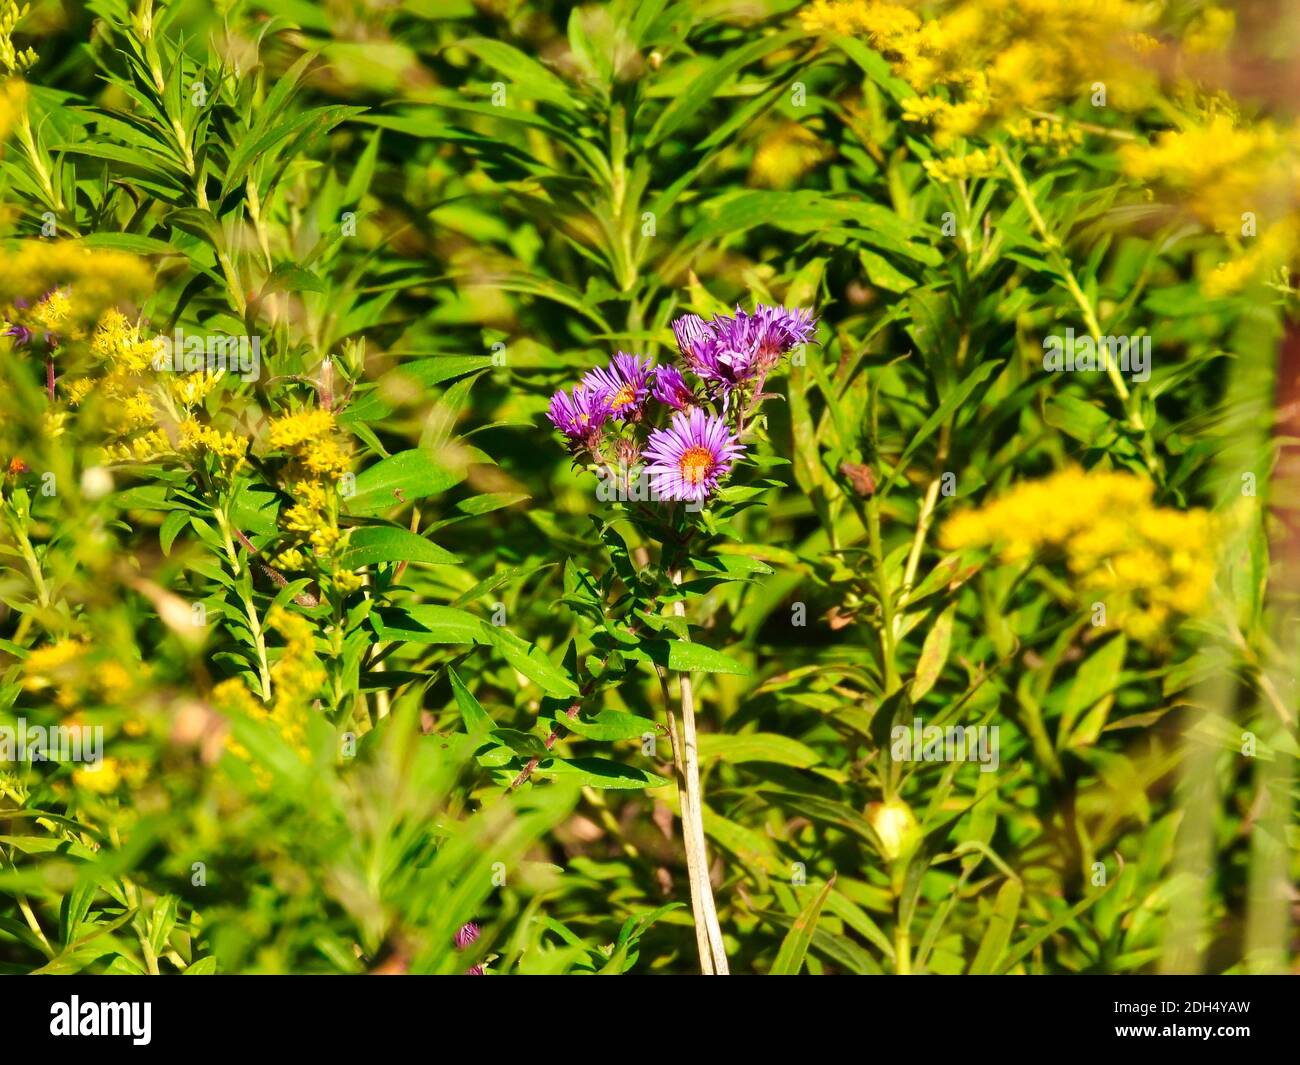 Purple New England Aster Wildflower Stands Out Among a Prairie Field of Golden Rod Plants in the Summer Sunlight Stock Photo